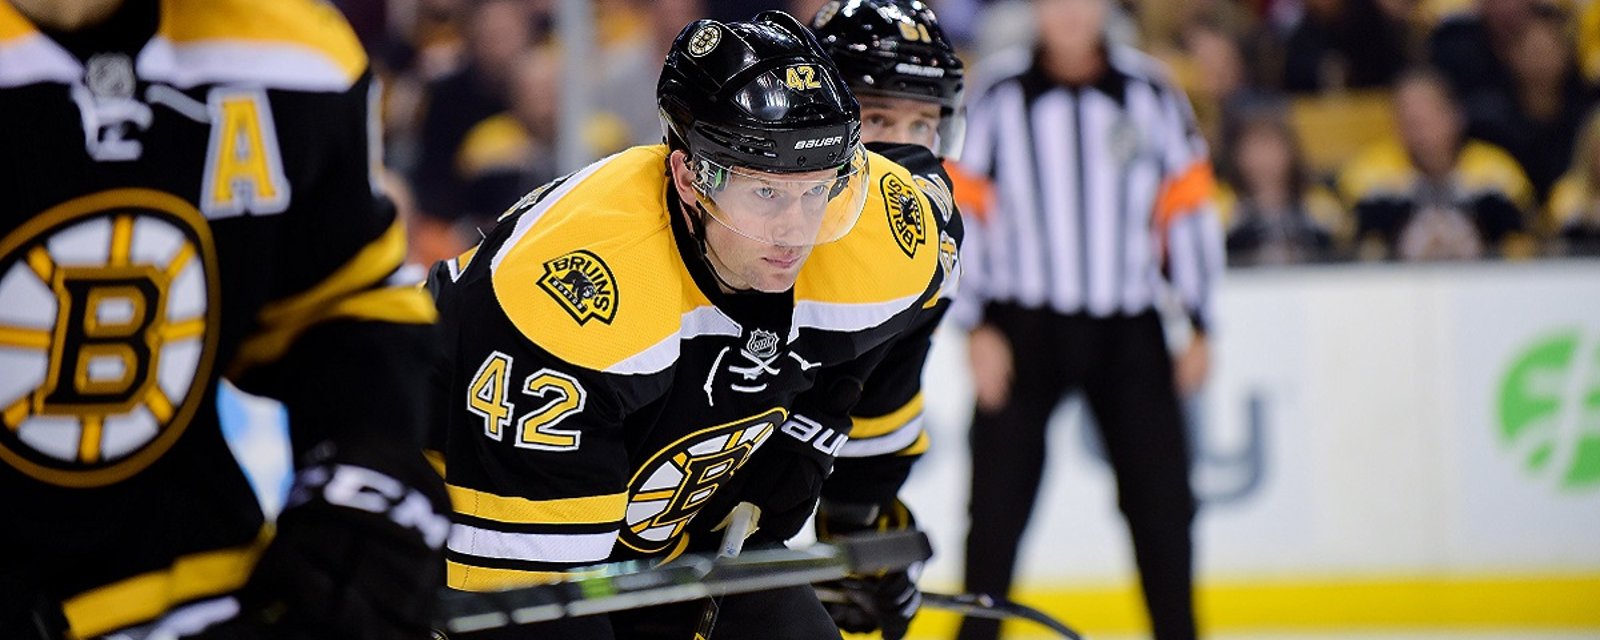 Breaking: Bruins forward has surgery after team claimed it was “minor issue”.